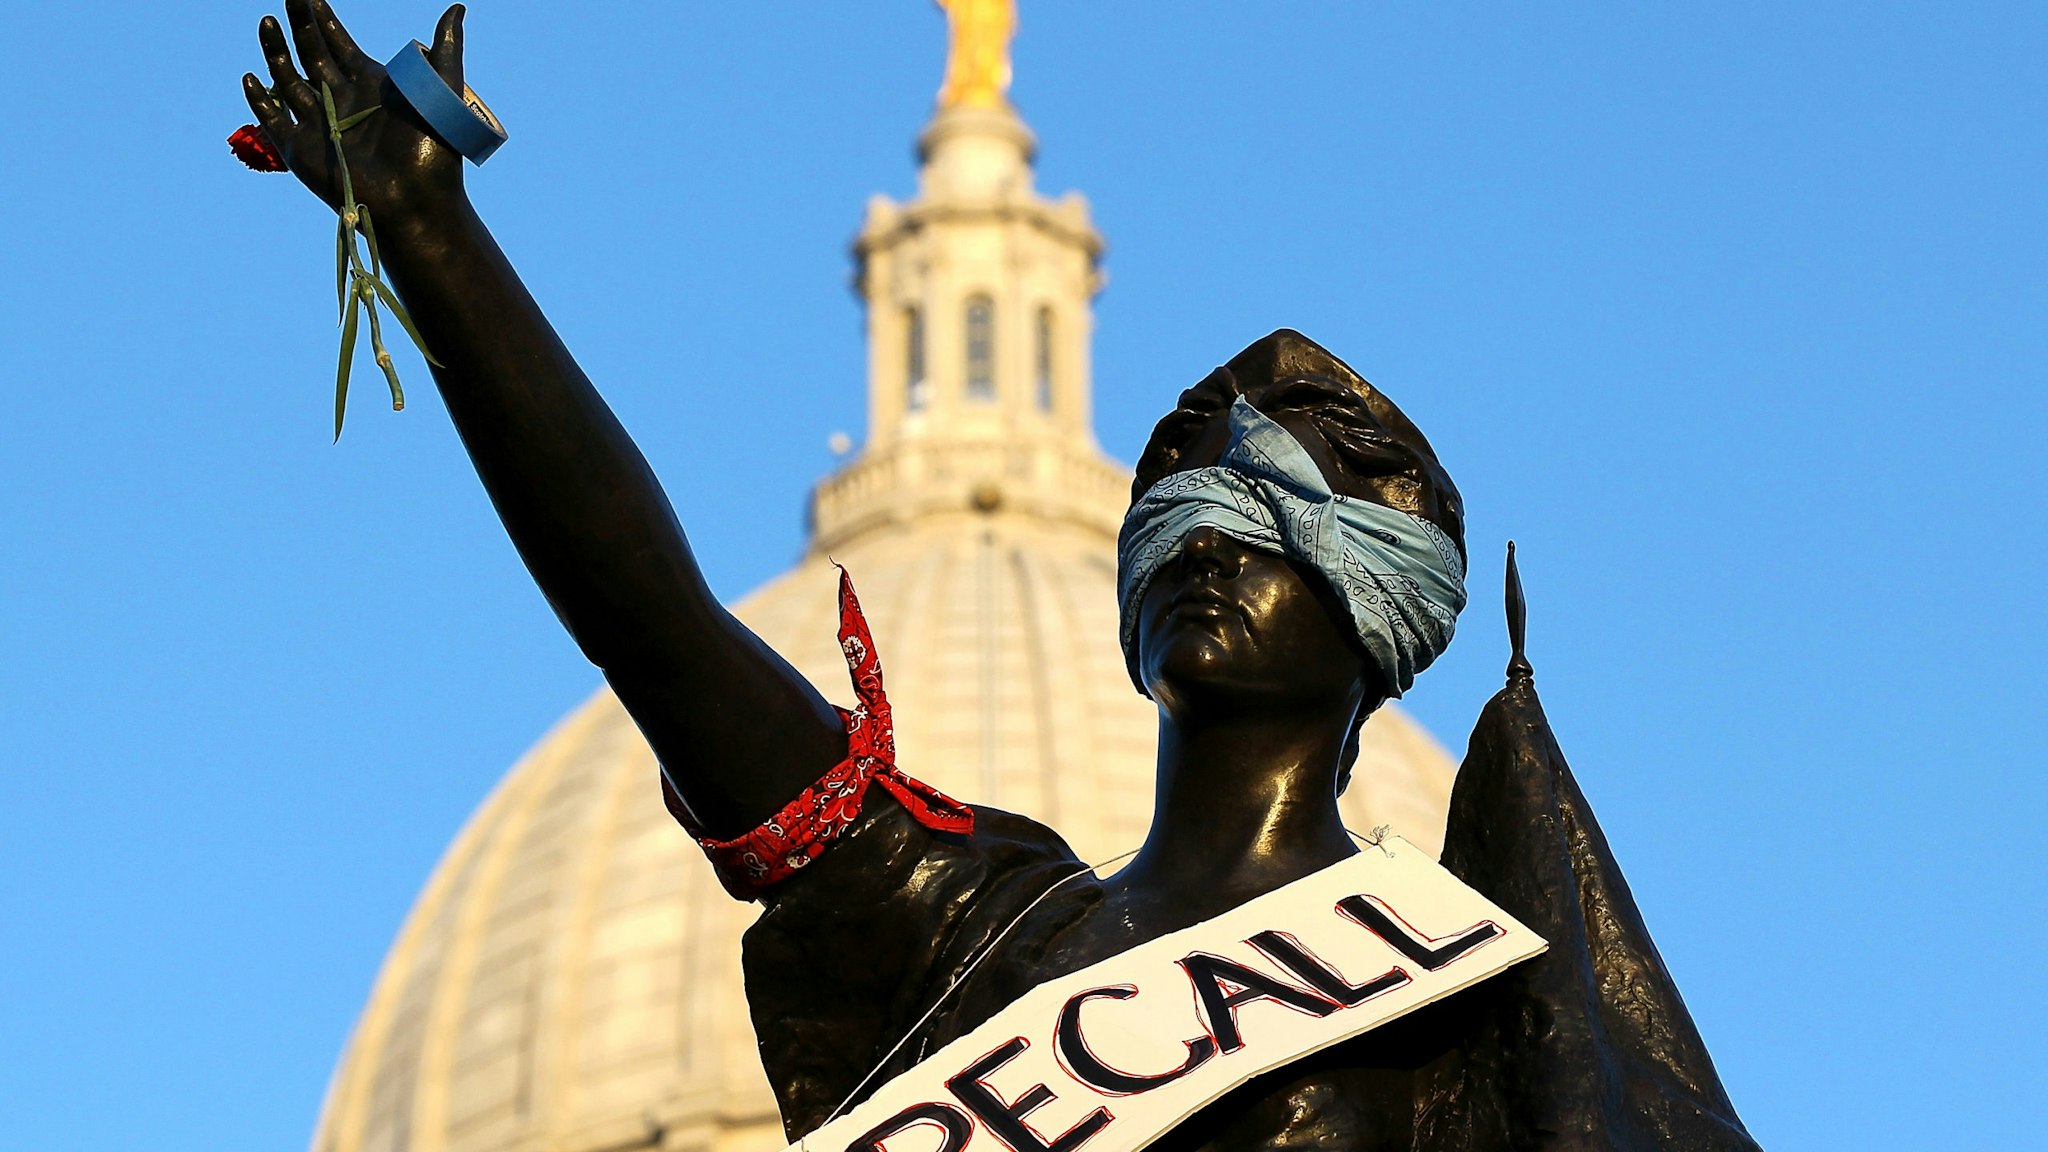 MADISON, WI - MARCH 10: A sign to recall Wisconsin Governor Scott Walker hangs on a statue in front of the Wisconsin State Capitol on March 10, 2011 in Madison, Wisconsin. Thousands of demonstrators continue to protest at the Wisconsin State Capitol as the Wisconsin House voted to pass the state's controversial budget bill one day after Wisconsin Republican Senators voted to curb collective bargaining rights for public union workers in a surprise vote with no Democrats present.